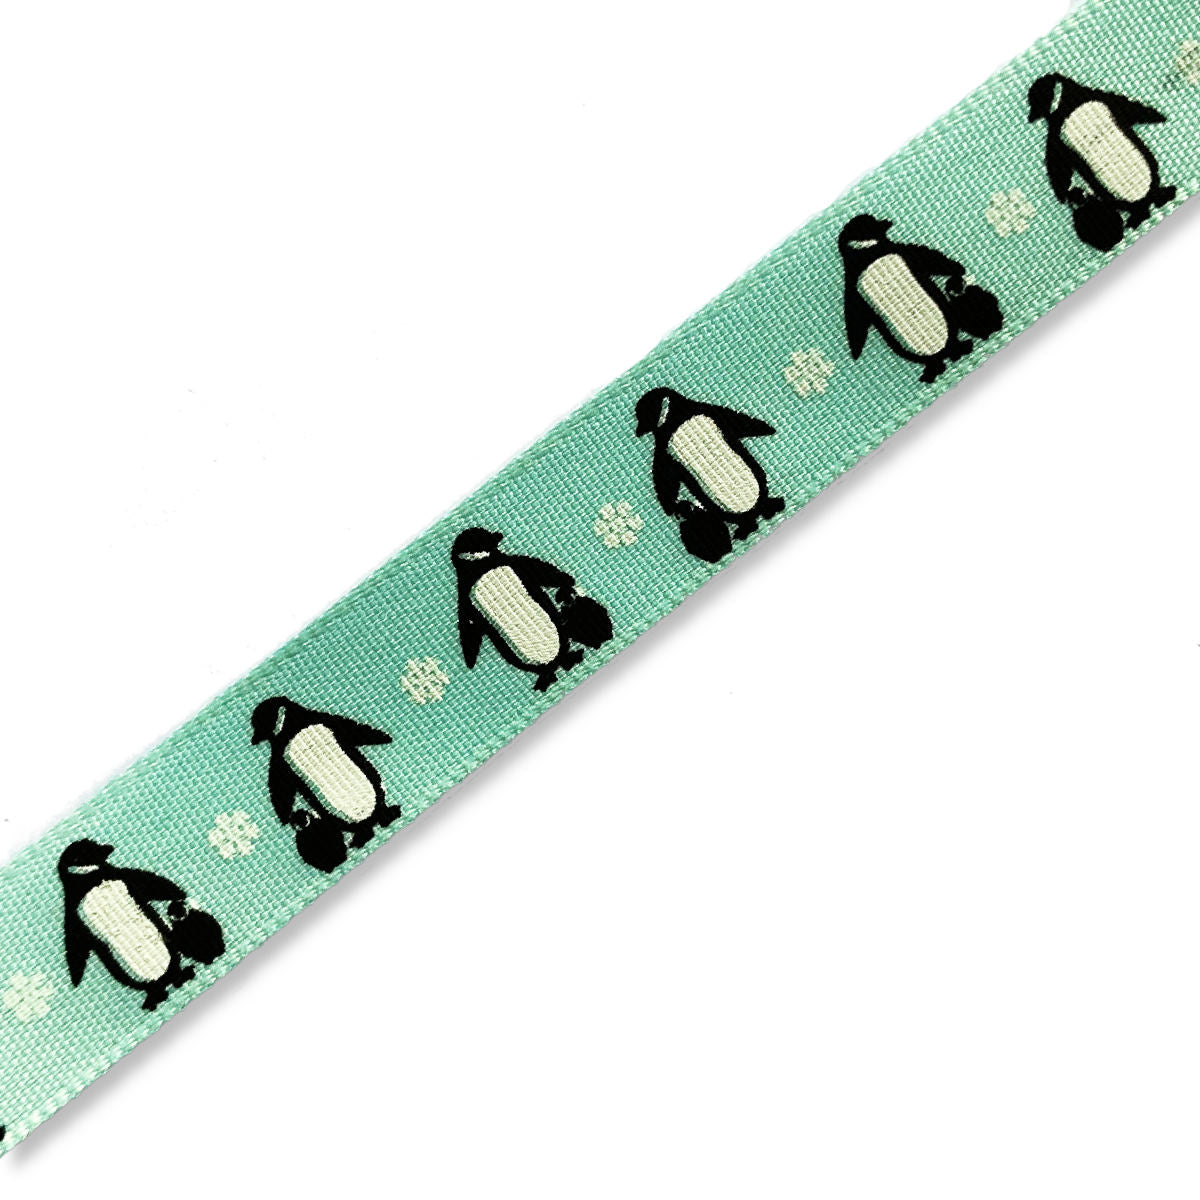 Blue 16mm ribbon with penguin and snowflake print